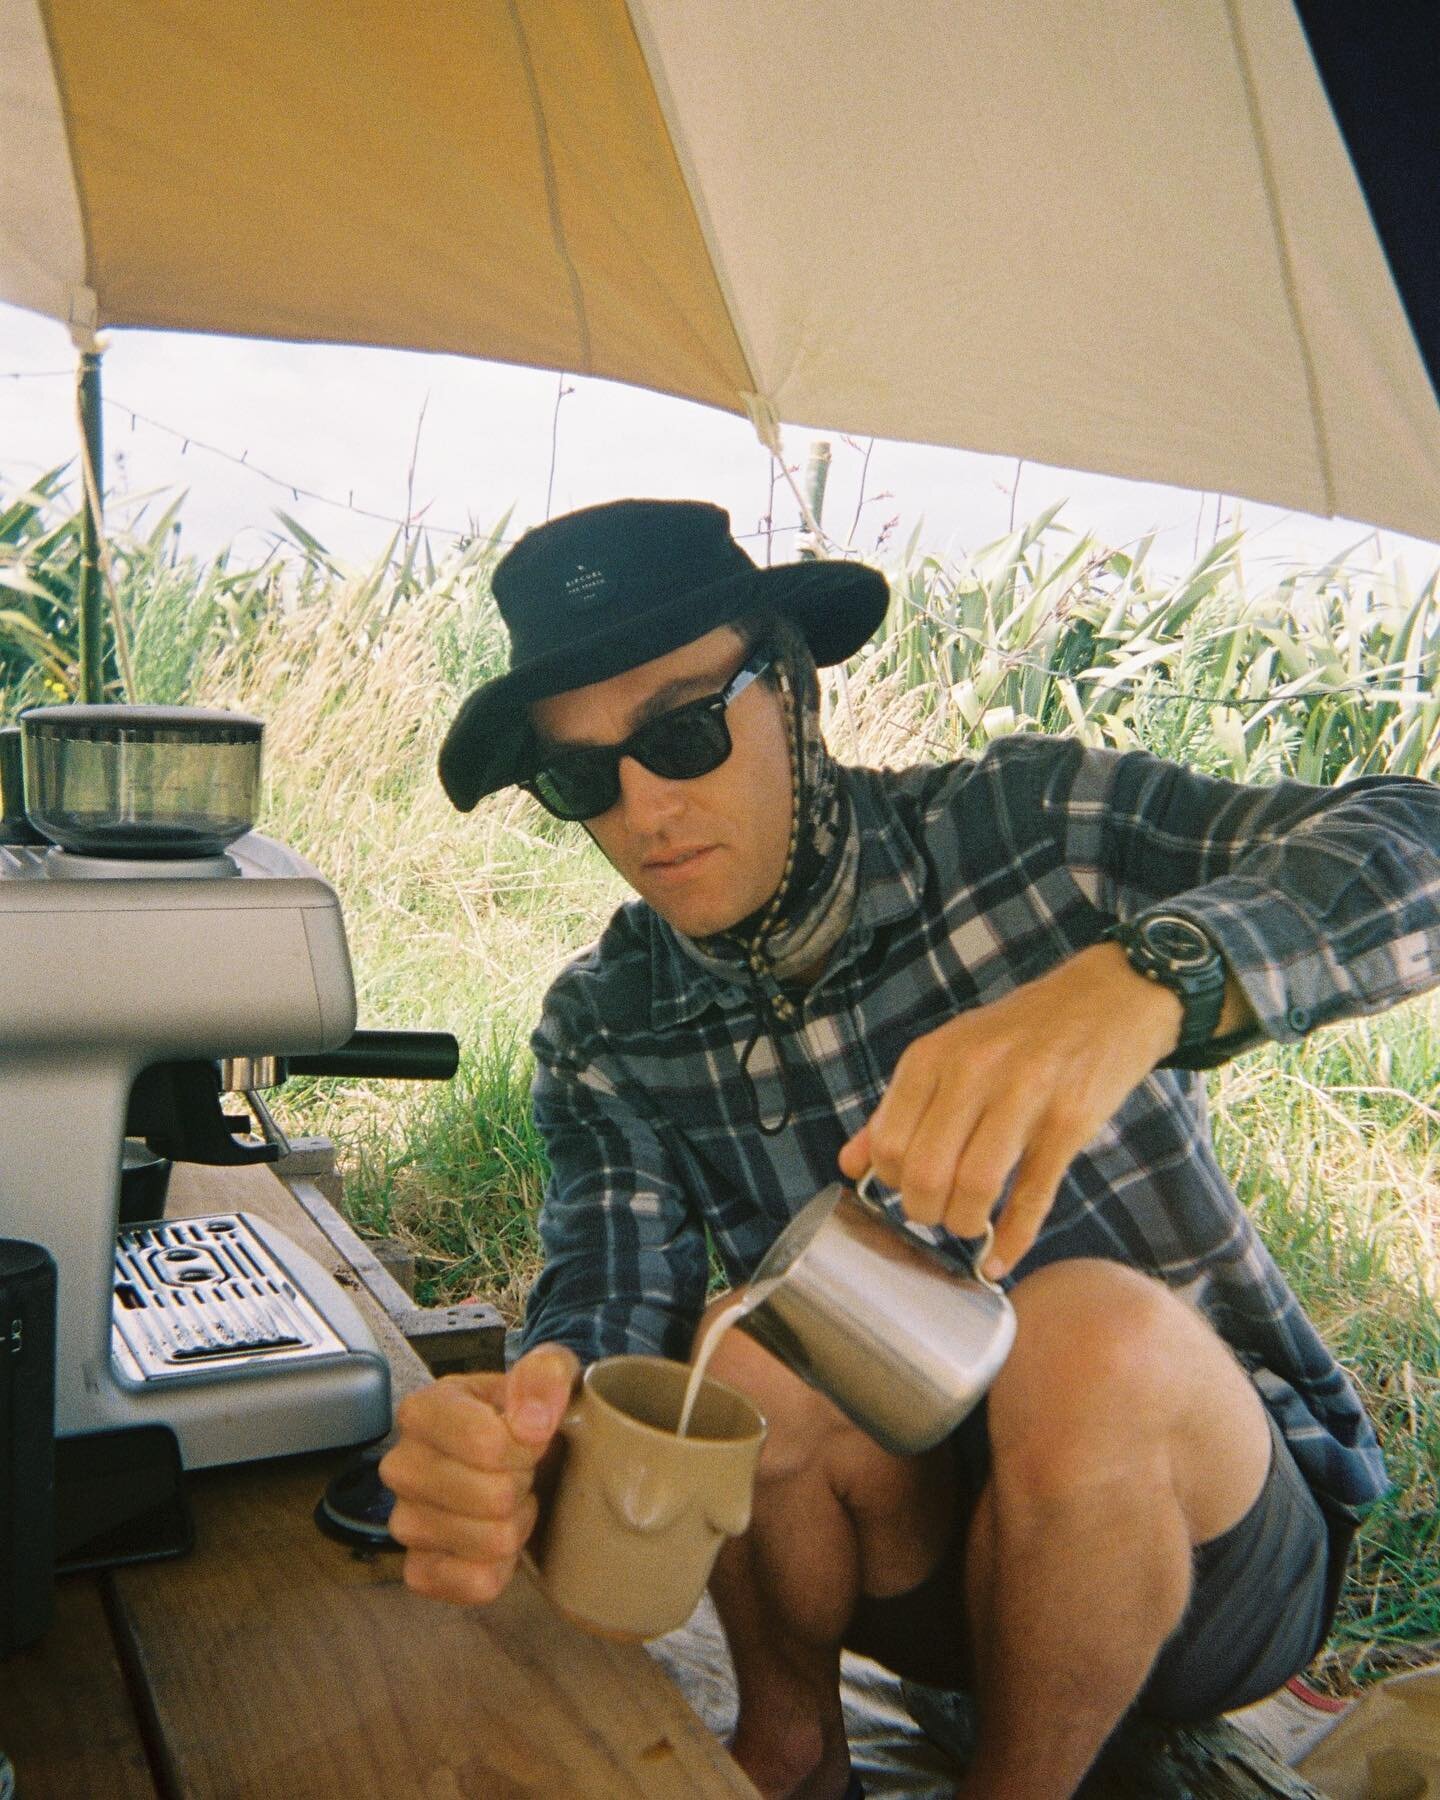 This time last year I had no pottery content after taking a summer break, so I posted a photo of my mate Liam making us coffee on New Year&rsquo;s Day way off the grid in beautiful Northland. So imagine my surprise when I end up here again, no potter